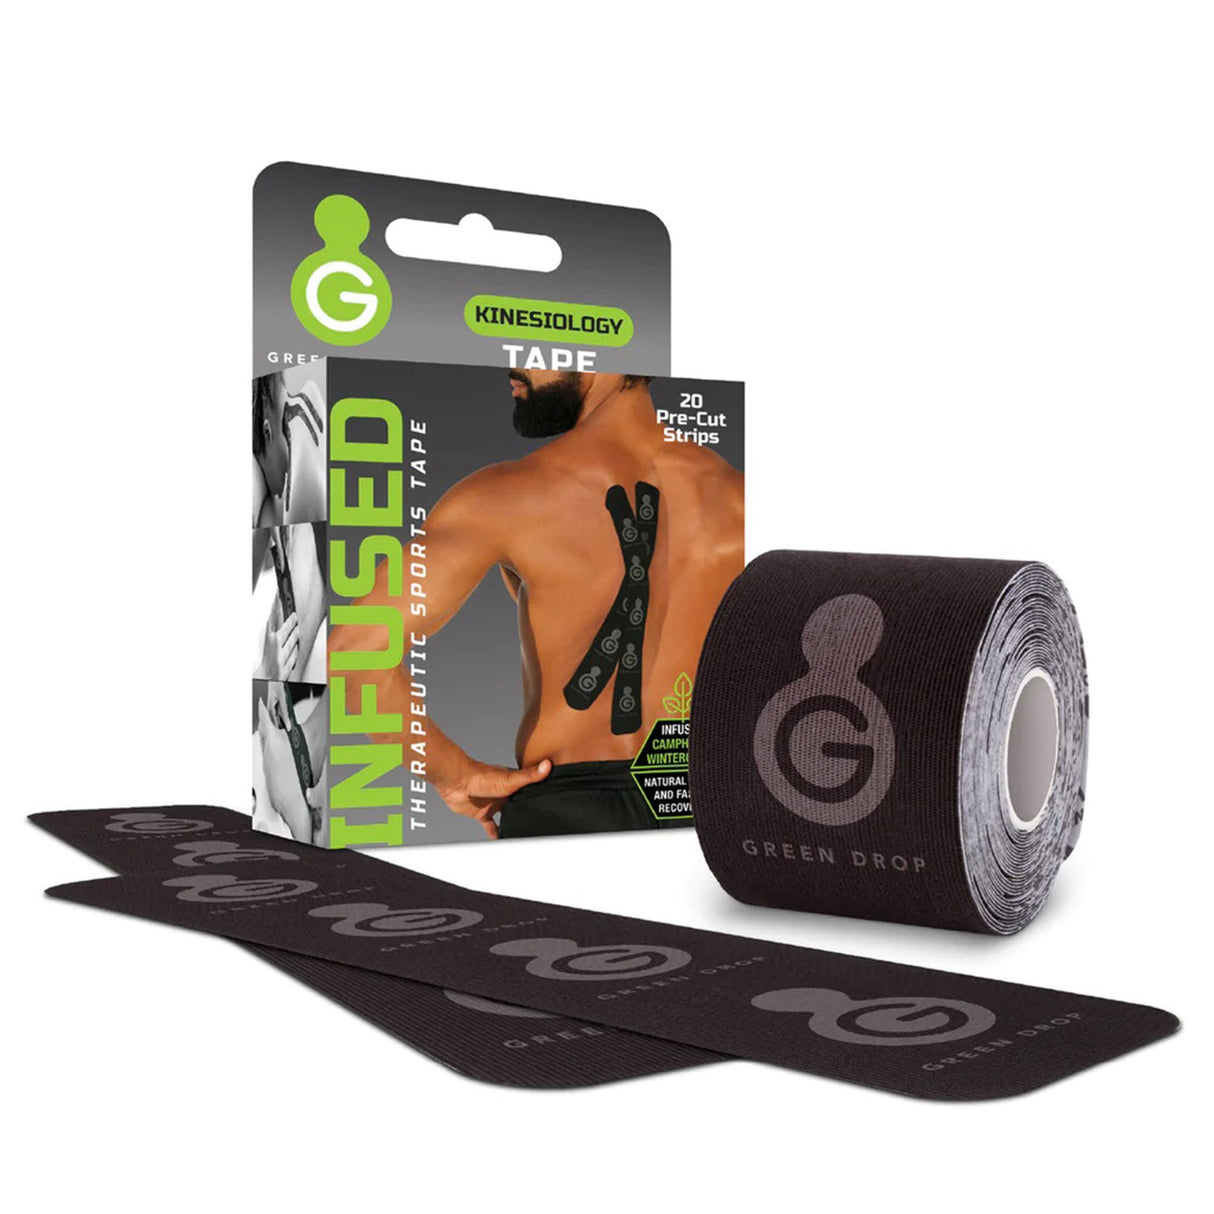 Green Drop Sports Tape, Infused Kinesiology Tape for Recovery - 20 Precut, 10” Strips